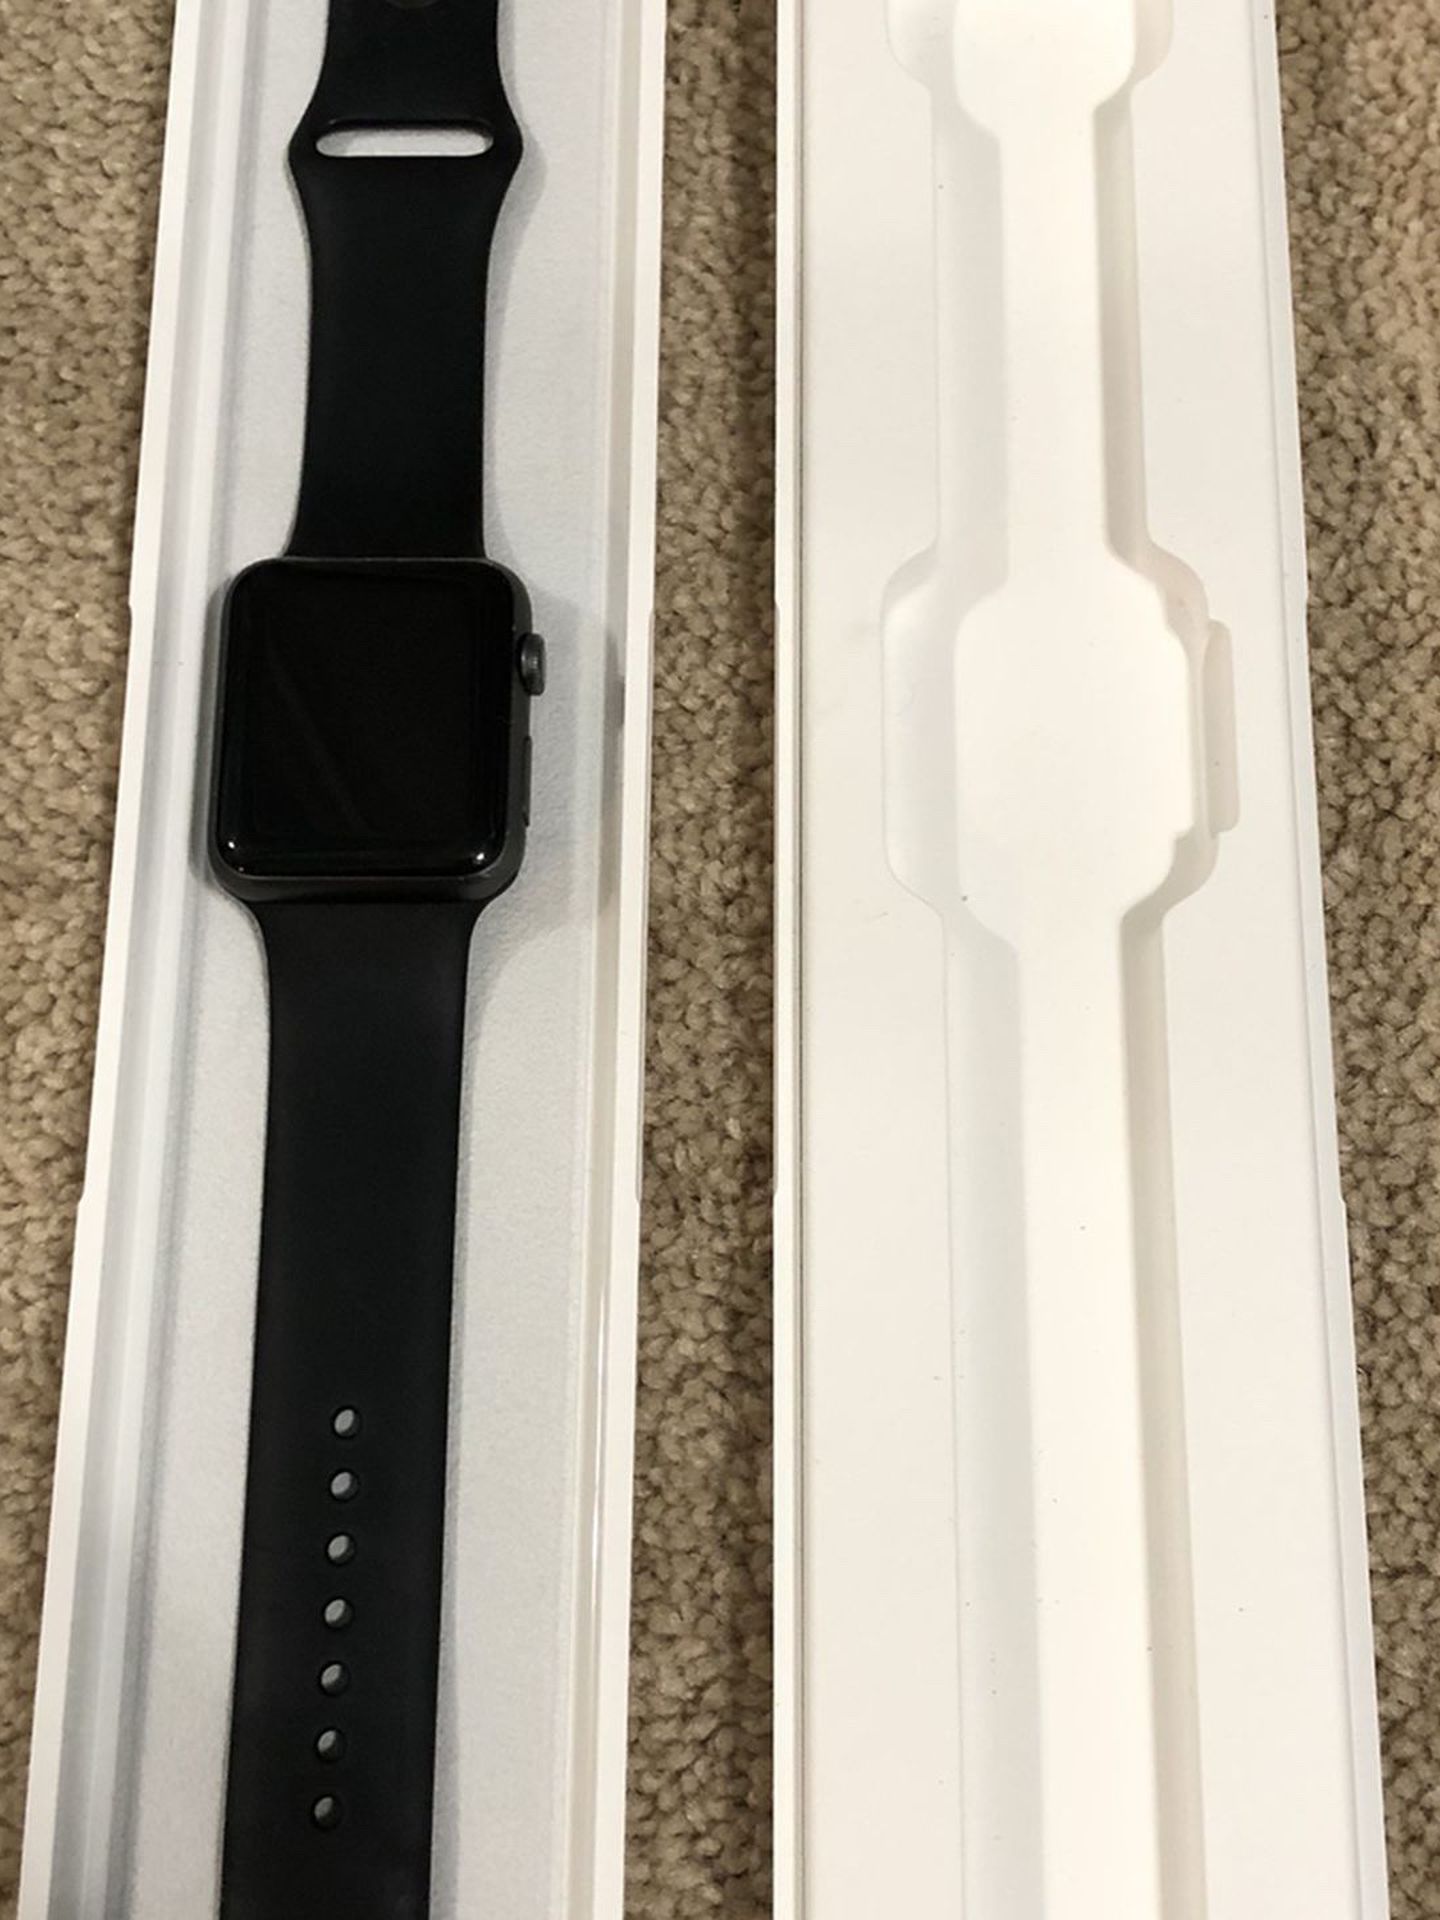 APPLE WATCH SERIES 1 SPORT not the Nike version. Needs new battery due to the battery swelling 3 days ago that caused the screen to loosen.